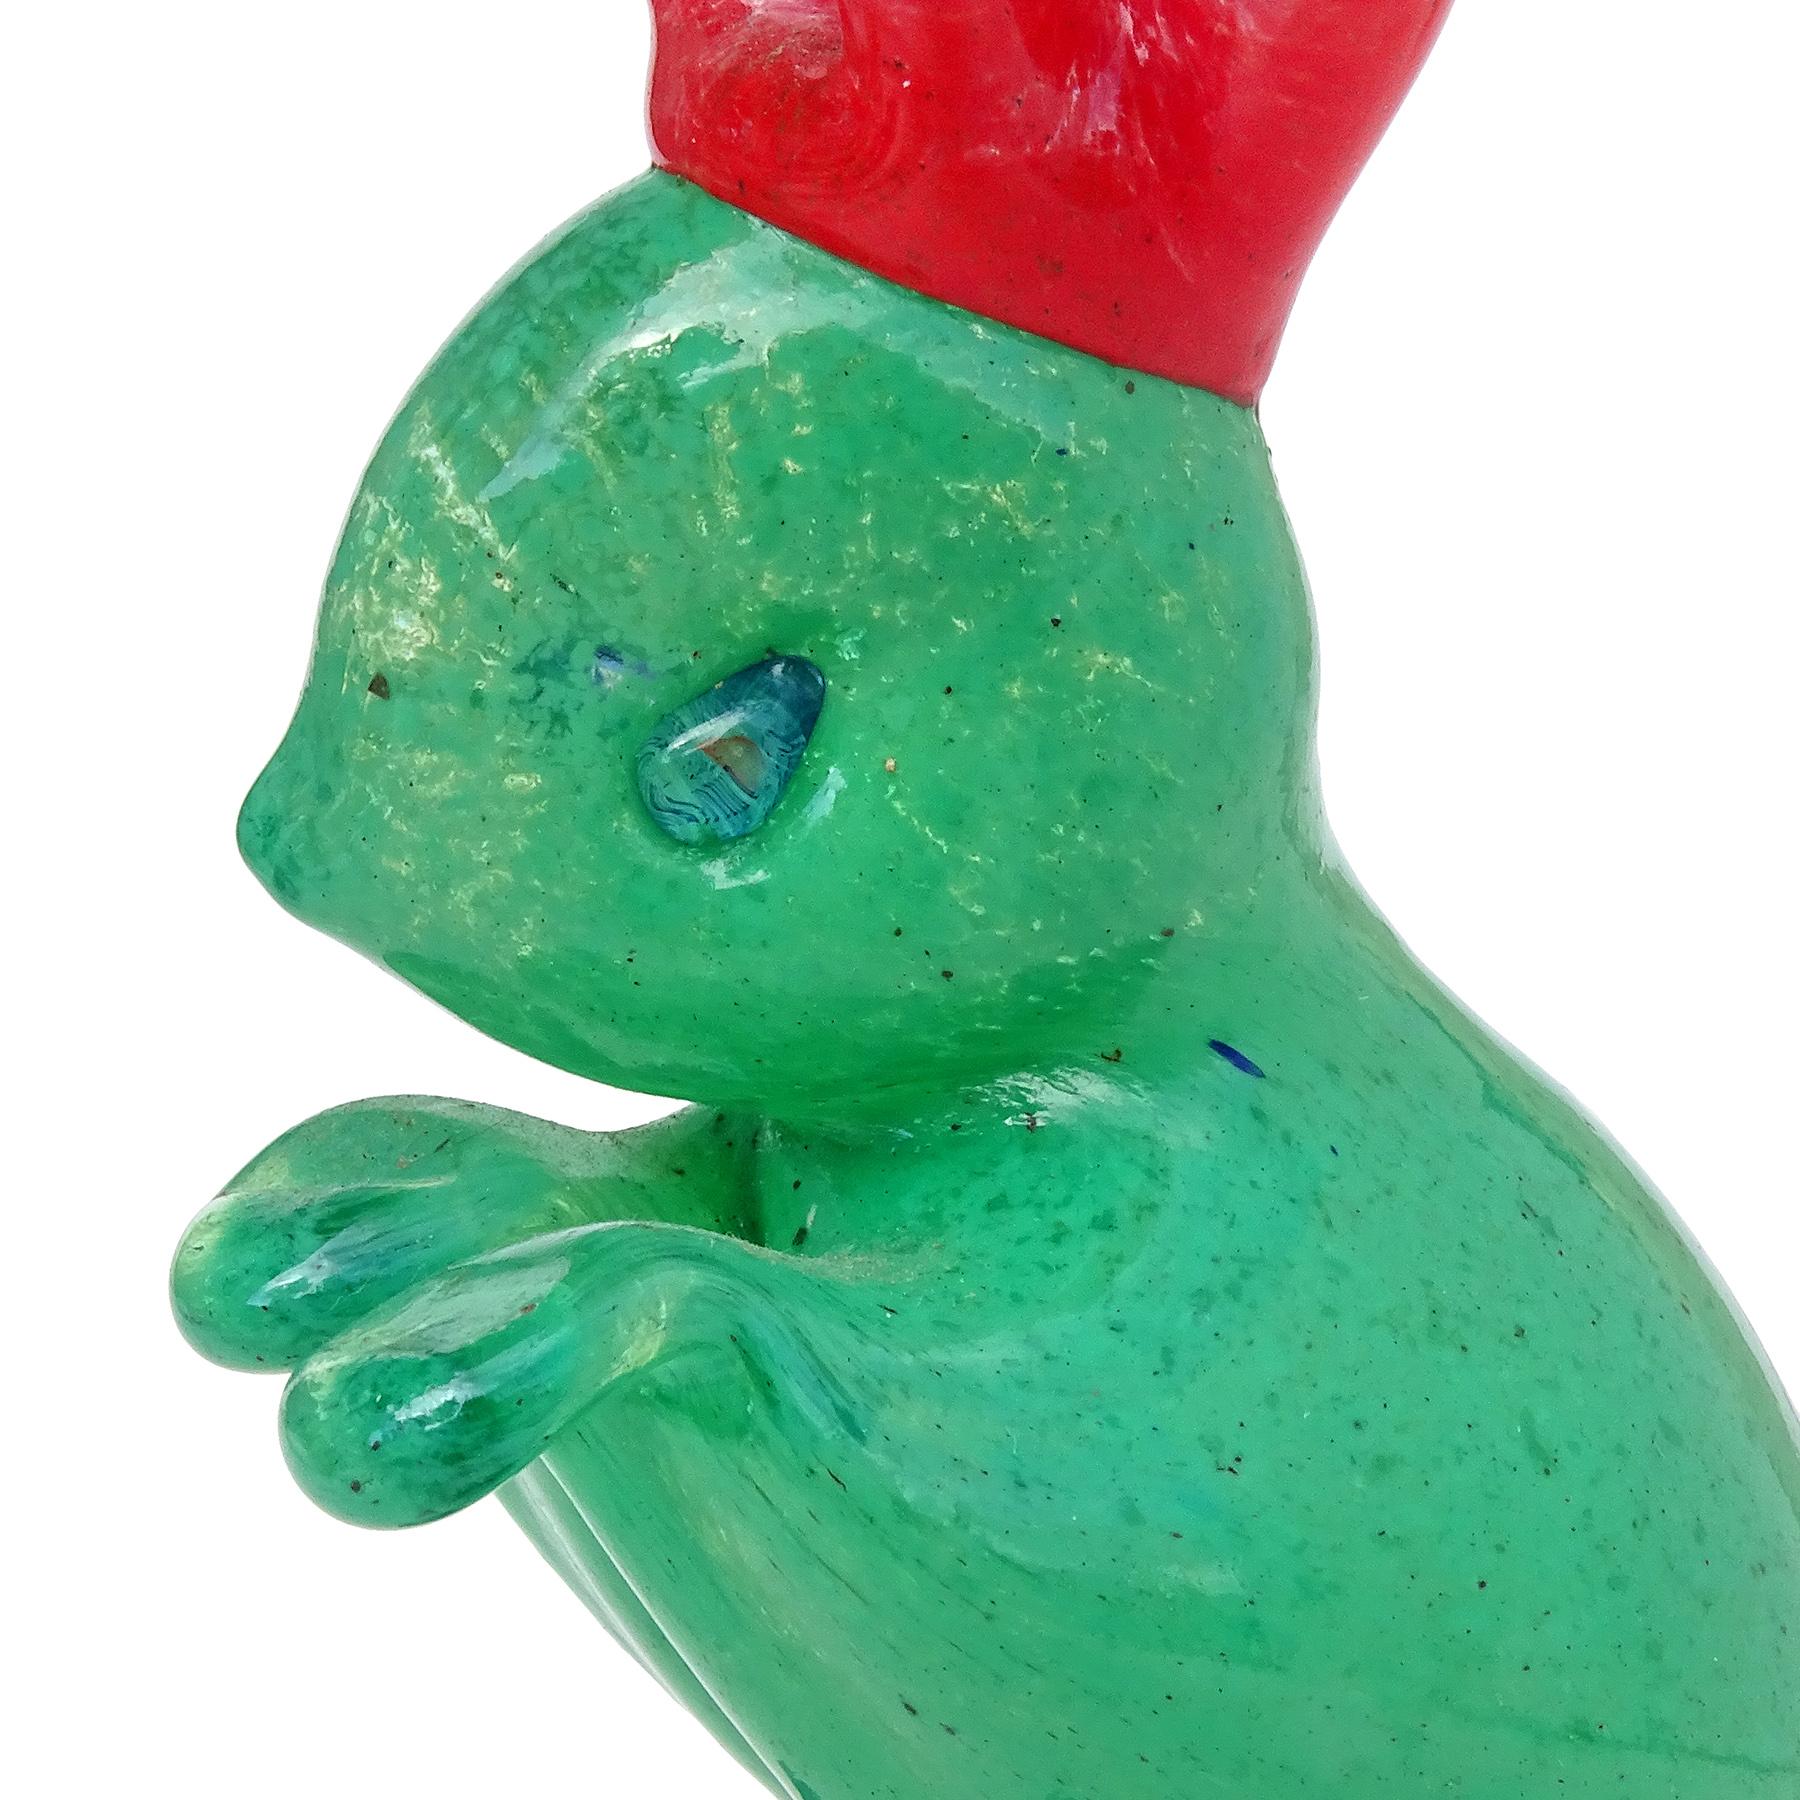 Beautiful vintage Murano hand green, red, and blue Italian art glass bunny rabbit figurine / sculpture. The piece is documented to the Gambaro & Poggi company, with an original 